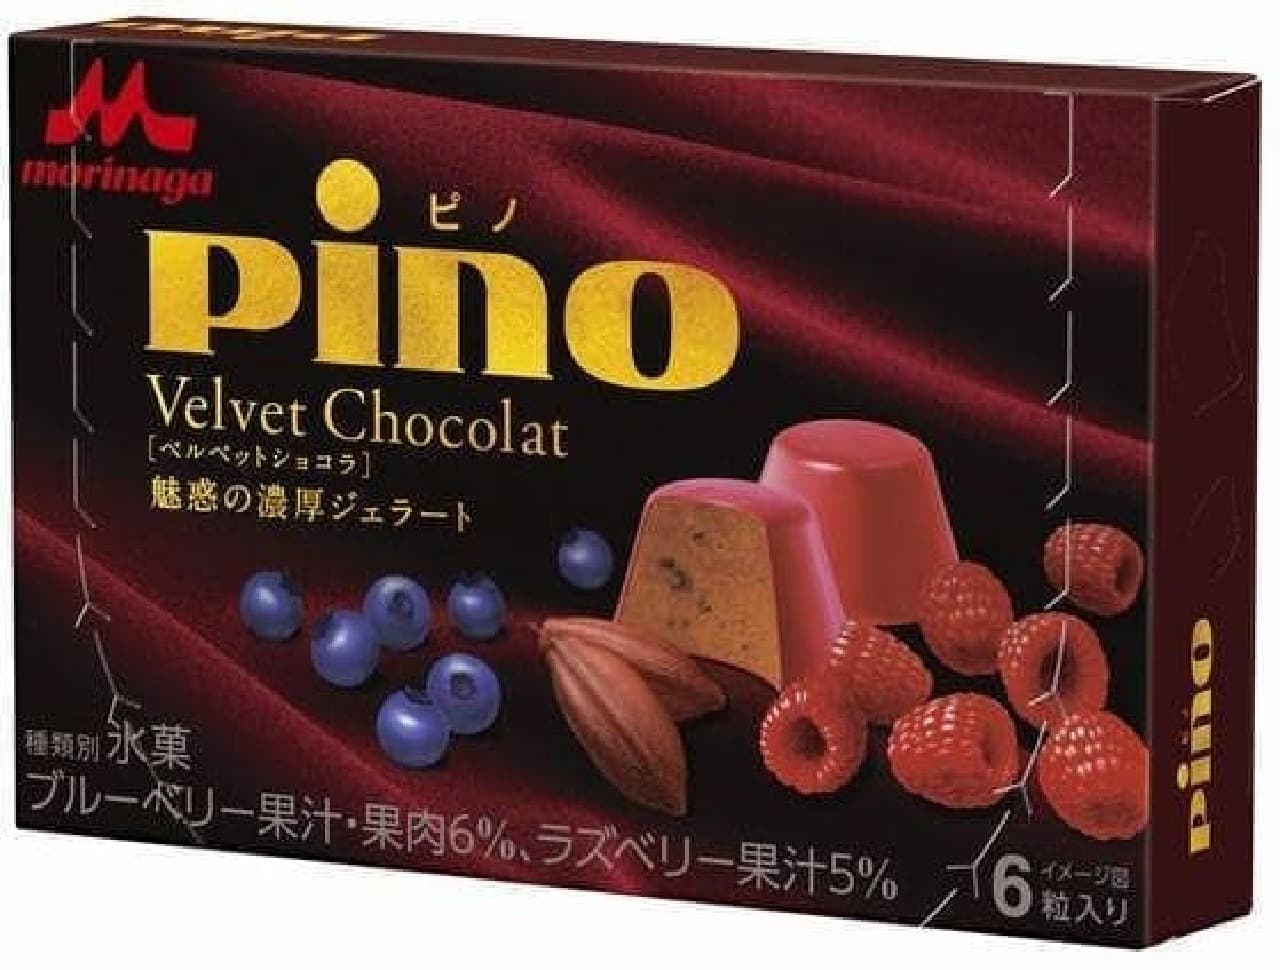 Adult taste with rich cacao and sweet and sour berries